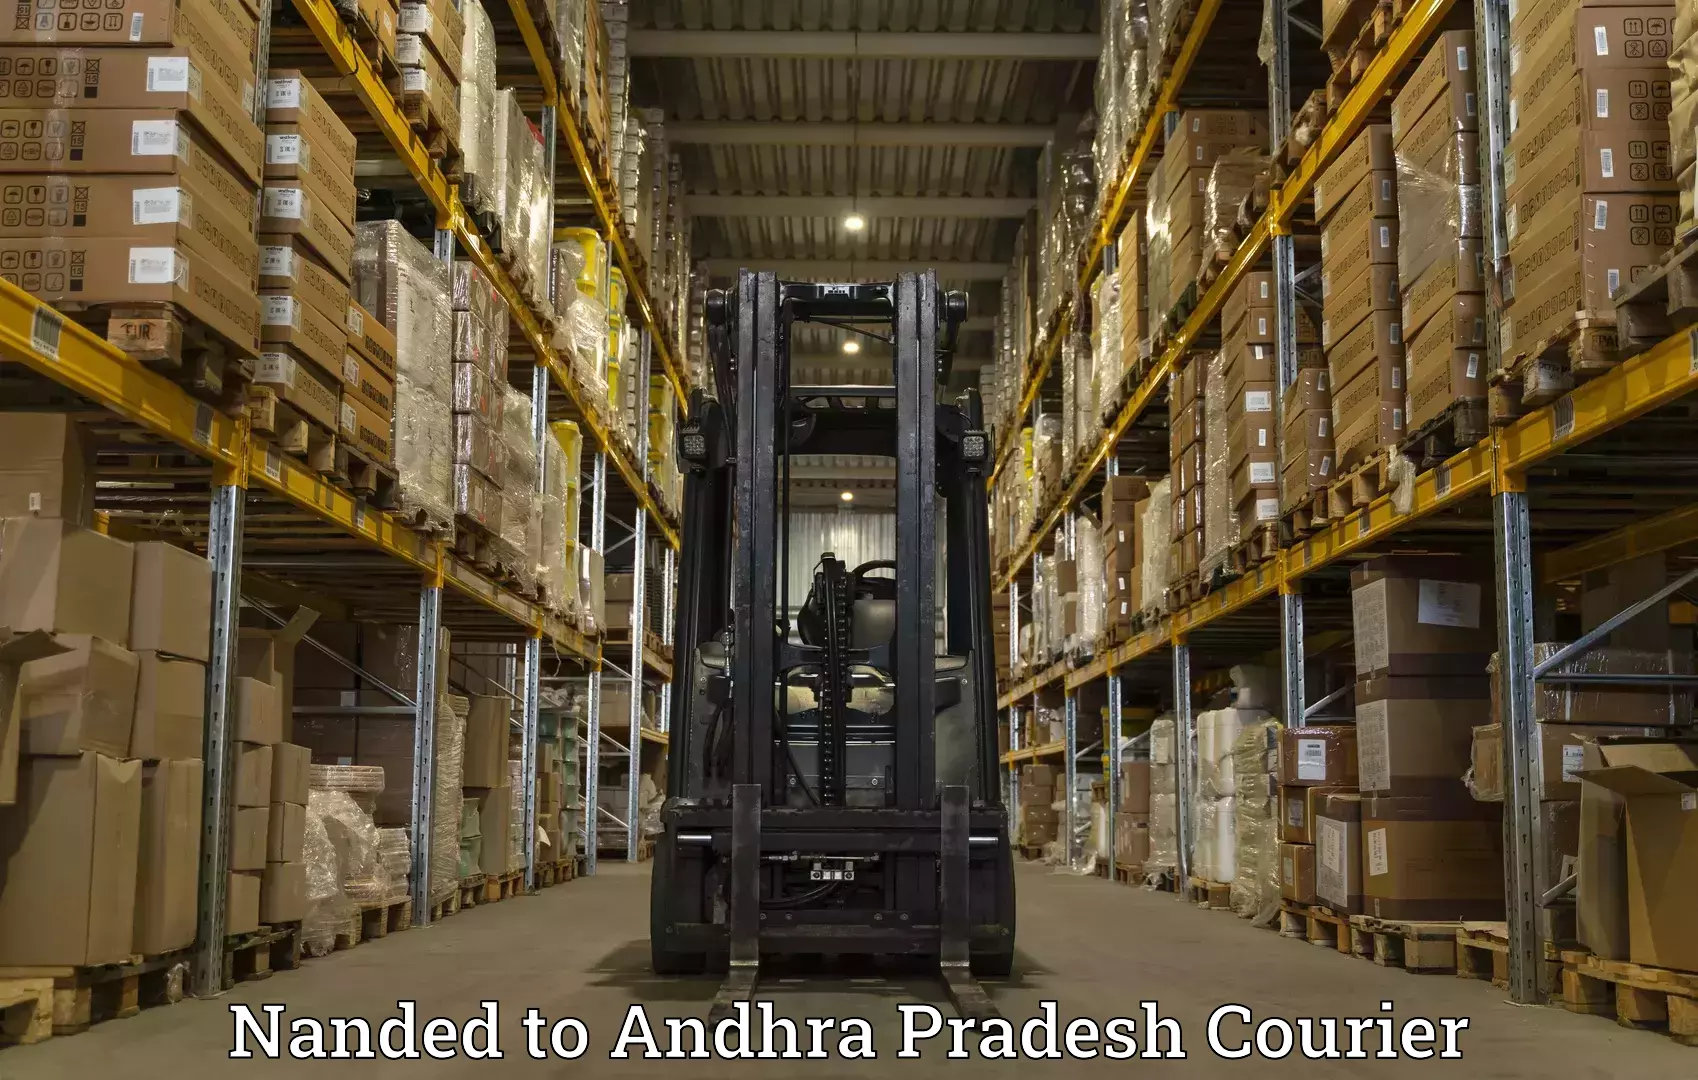 Shipping and handling Nanded to Cuddapah